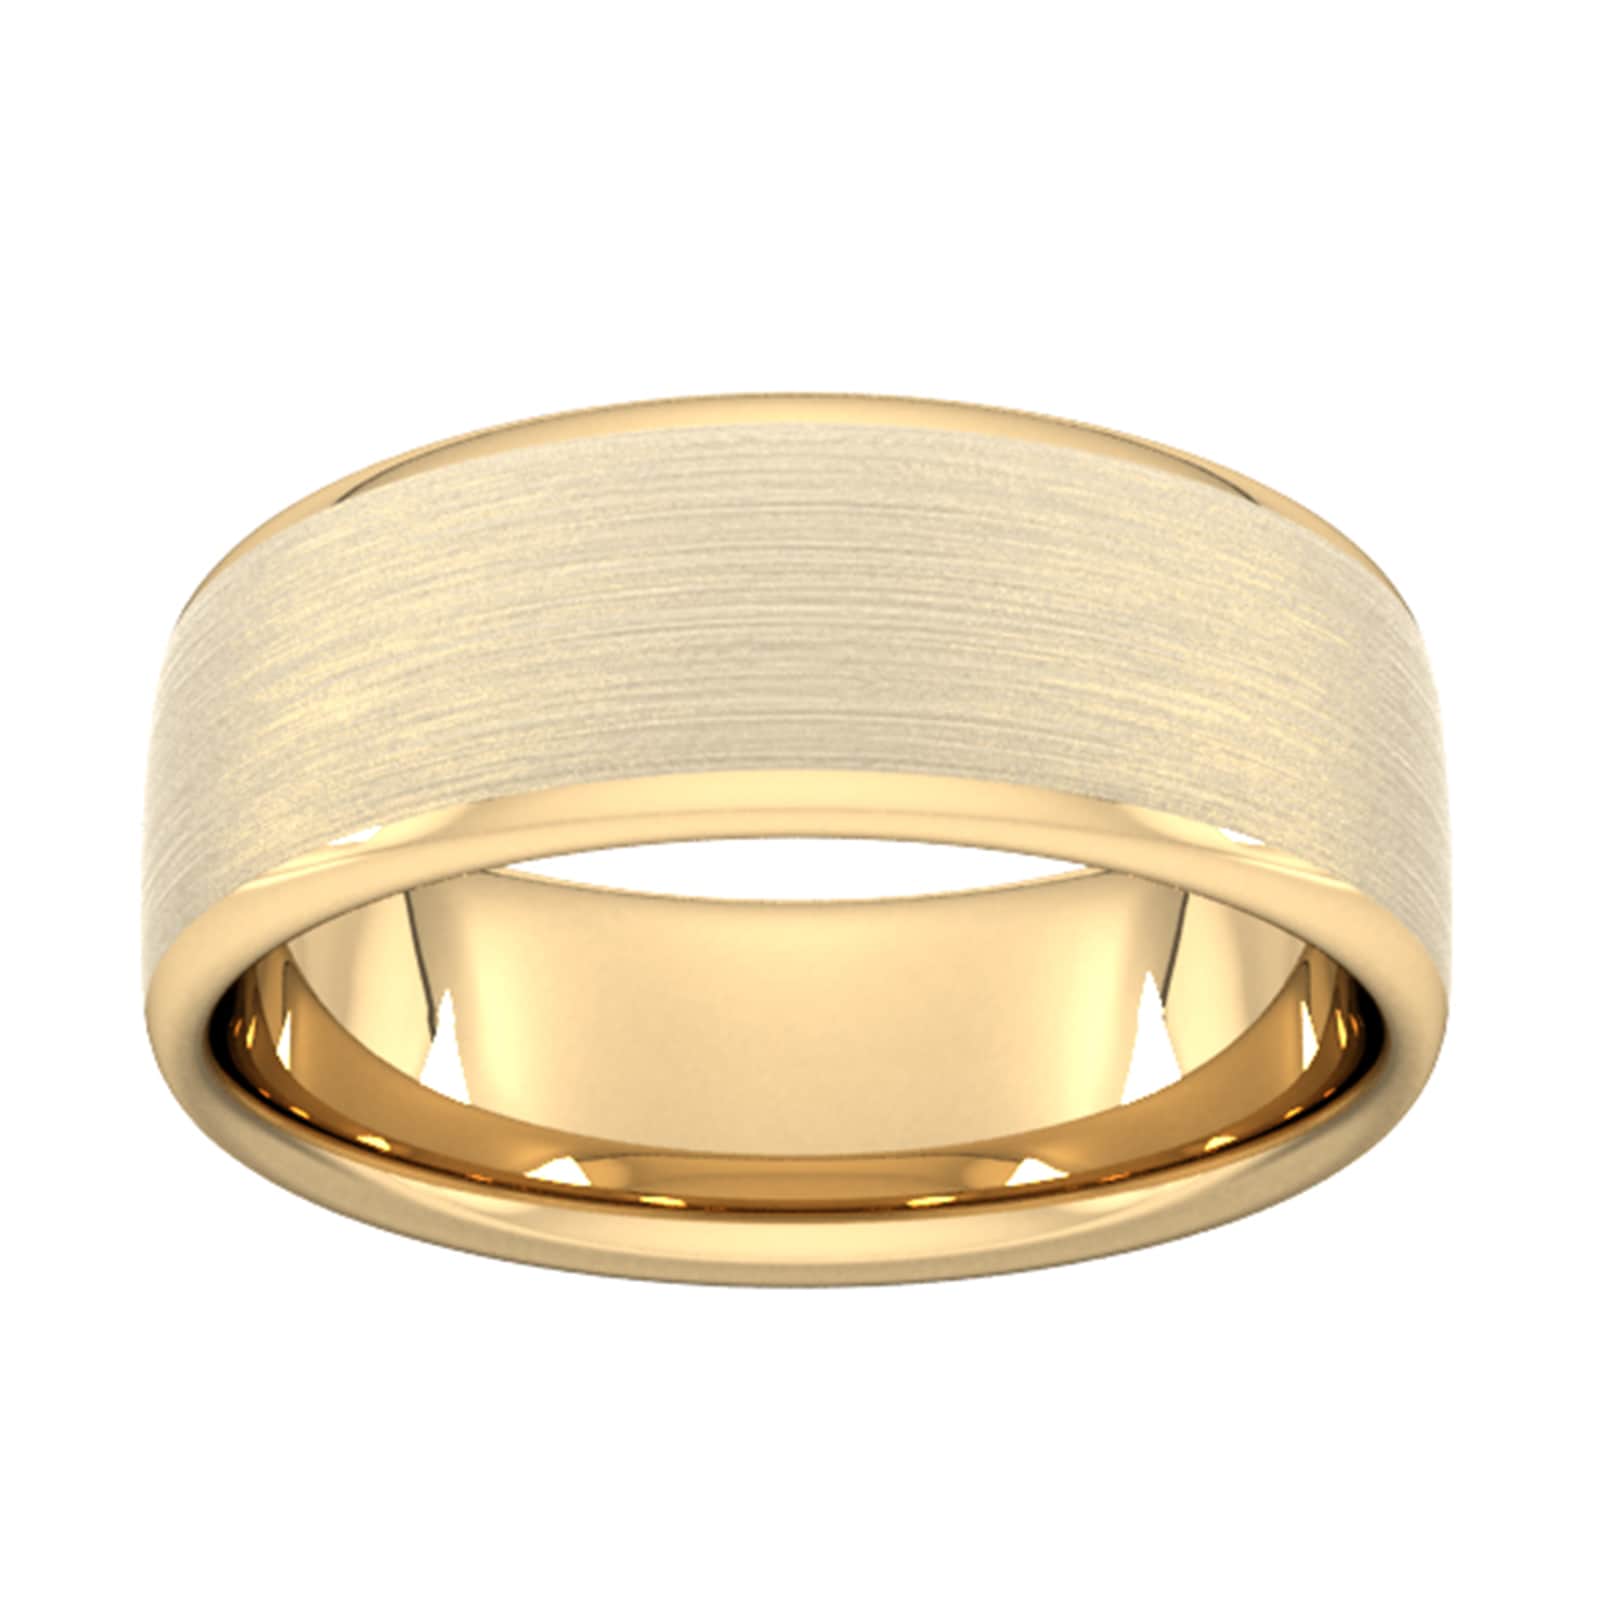 8mm Traditional Court Heavy Matt Finished Wedding Ring In 18 Carat Yellow Gold - Ring Size S